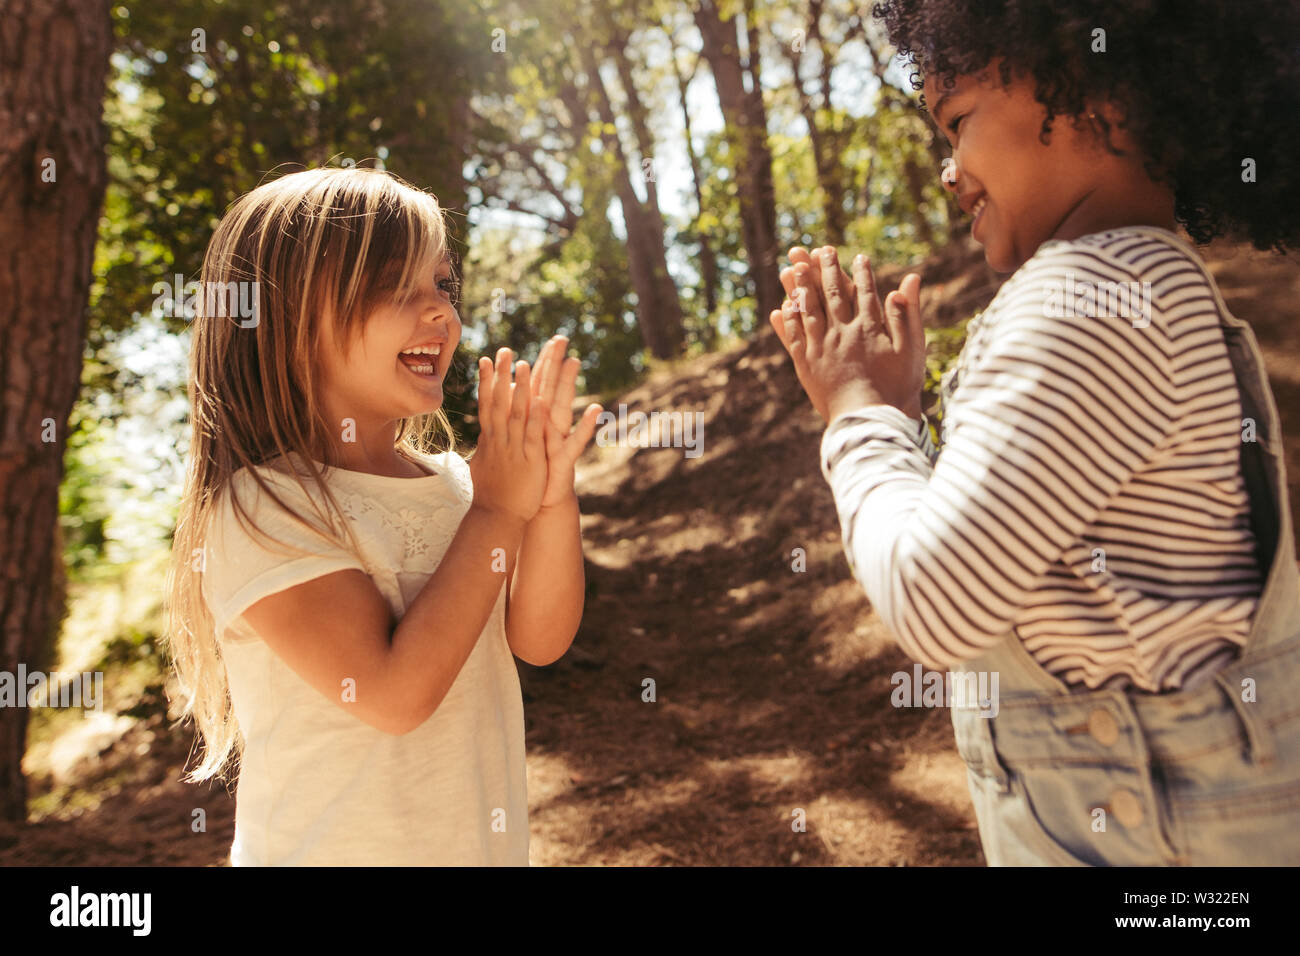 Cute girls playing clapping games outdoors. Children playing games in forest. Stock Photo